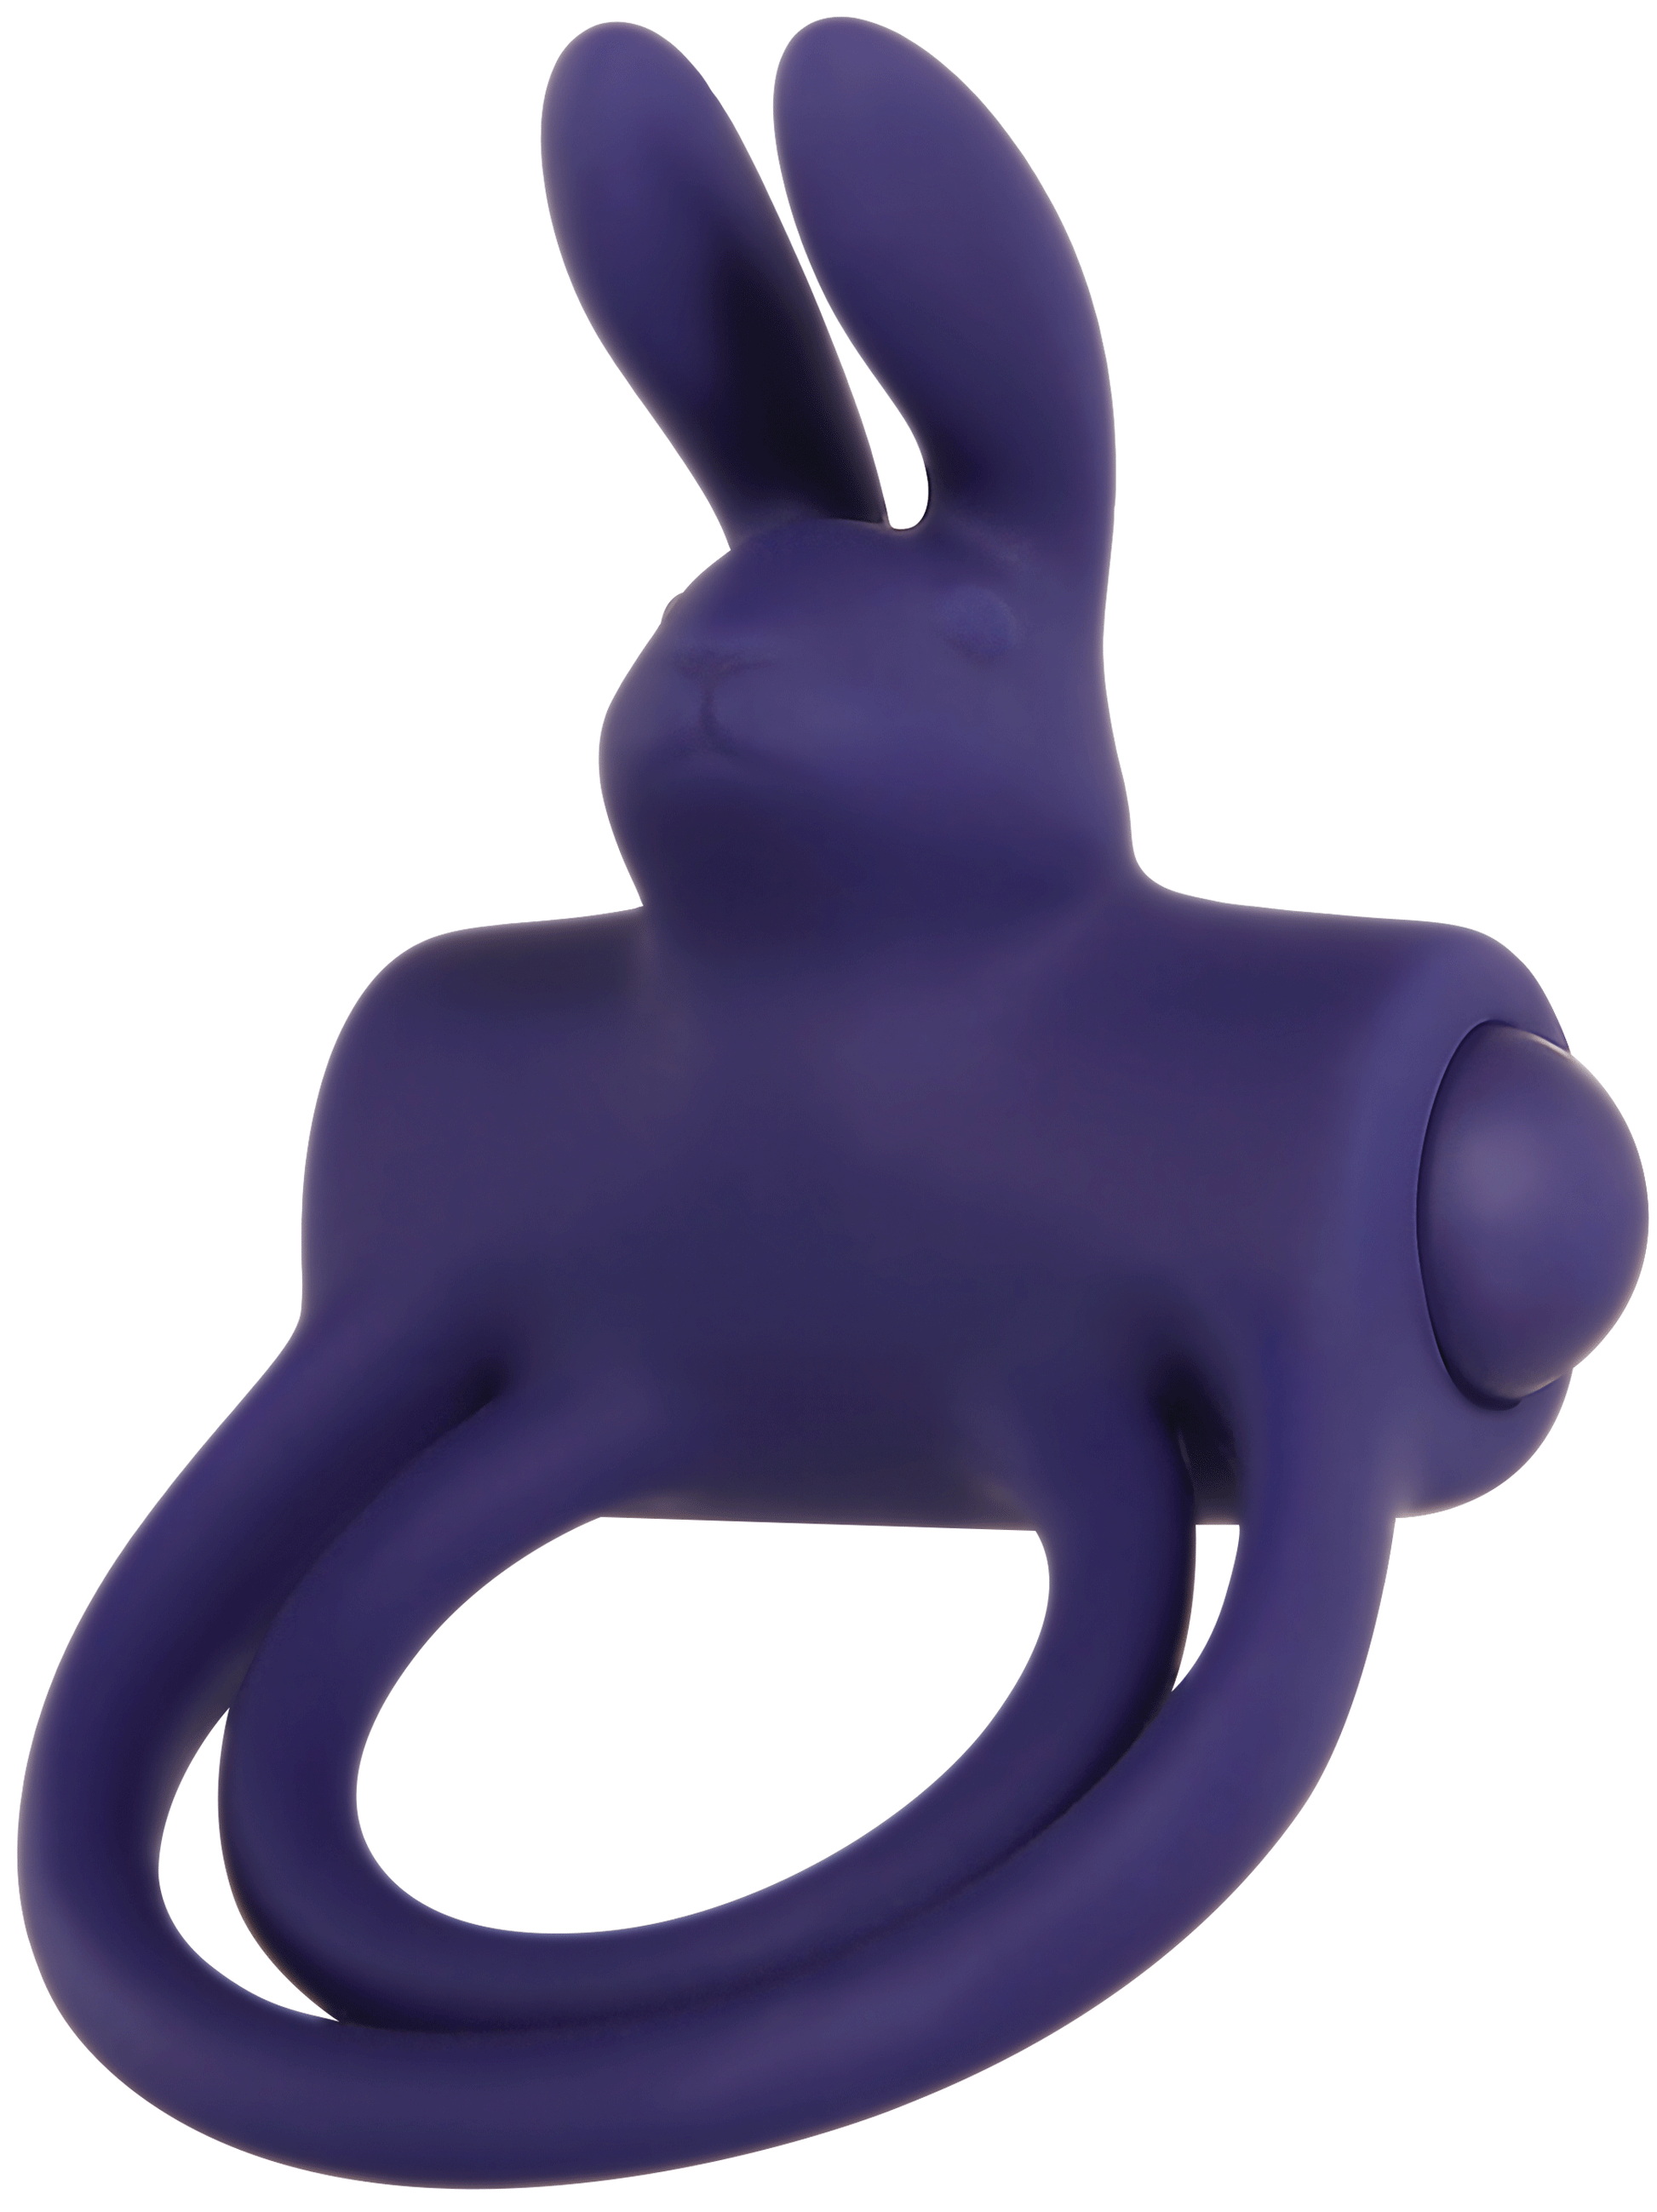 Adam and Eve Silicone Remote Control Rabbit Ring - My Sex Toy Hub